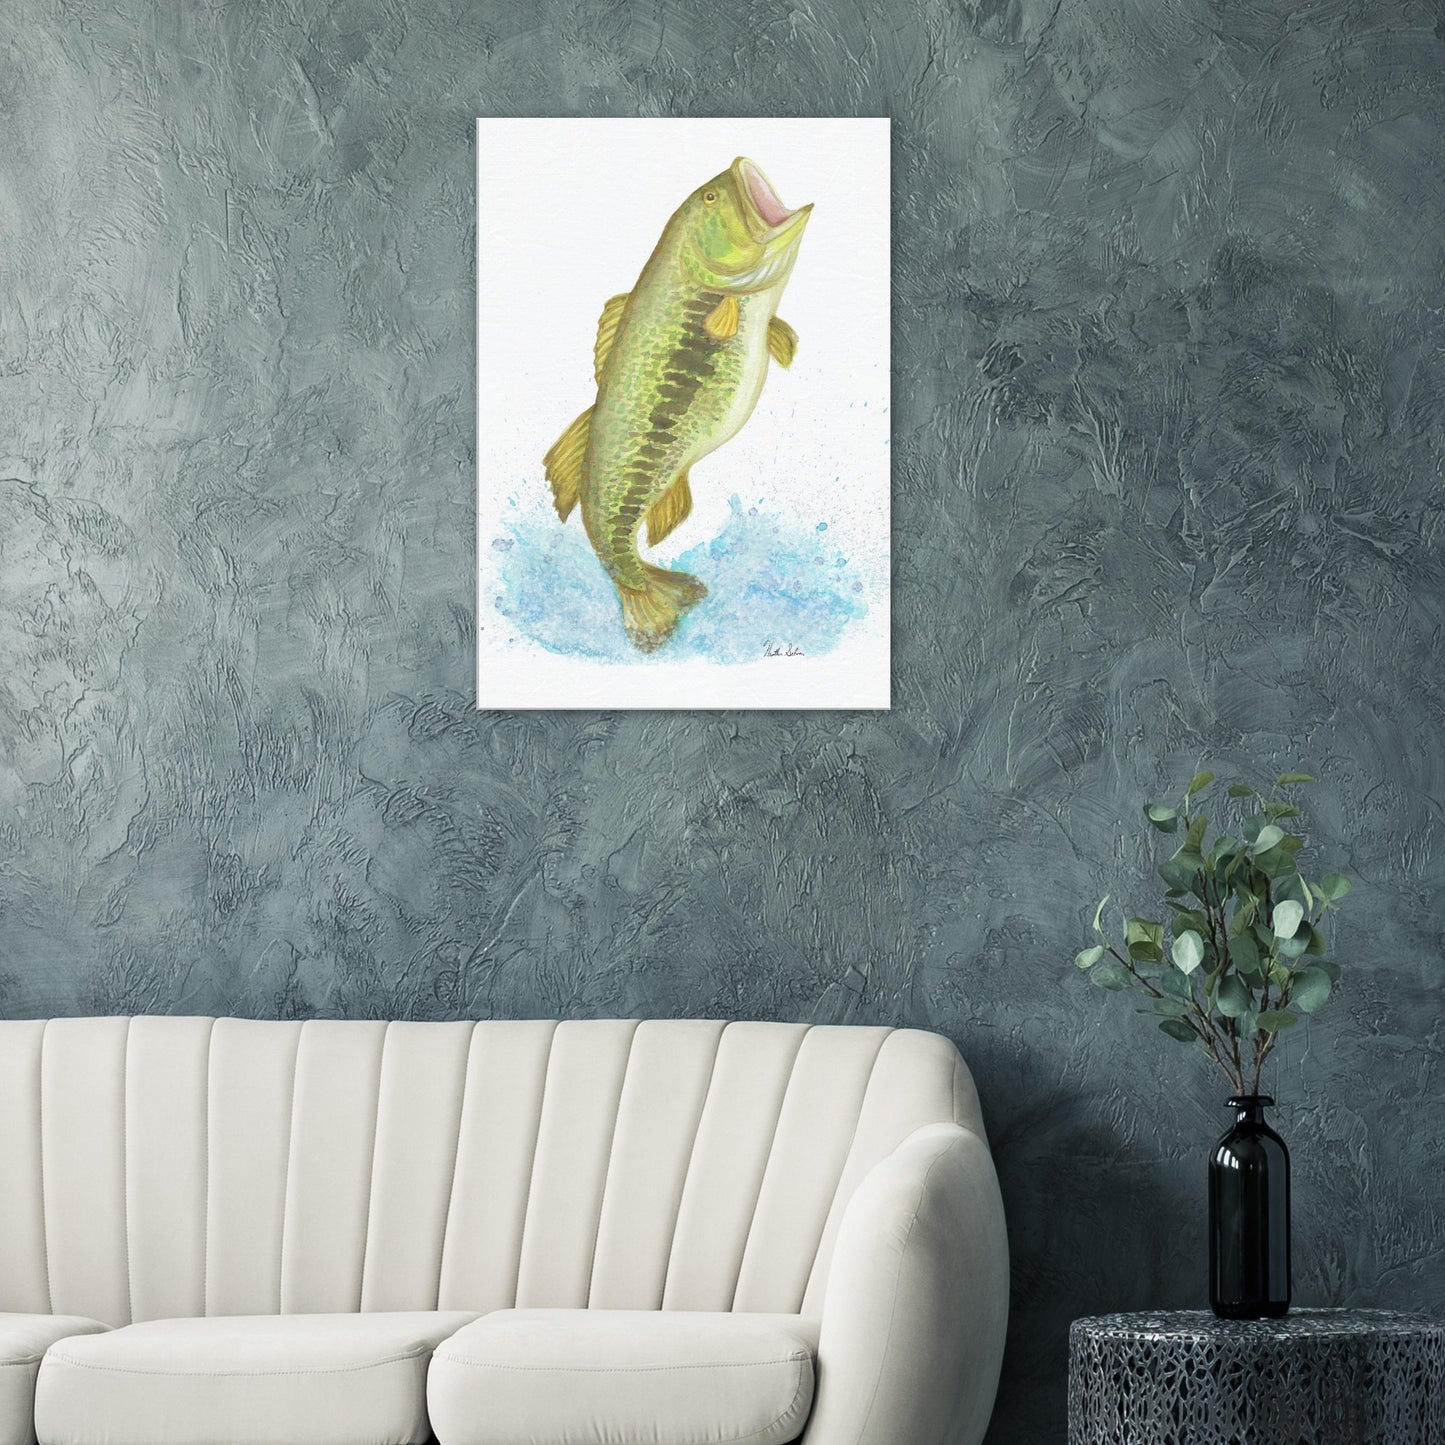 28 by 40 inch slim canvas wall art print featuring a watercolor painting of a largemouth bass leaping from the water. Shown on green wall above white sofa, end table, and vase.